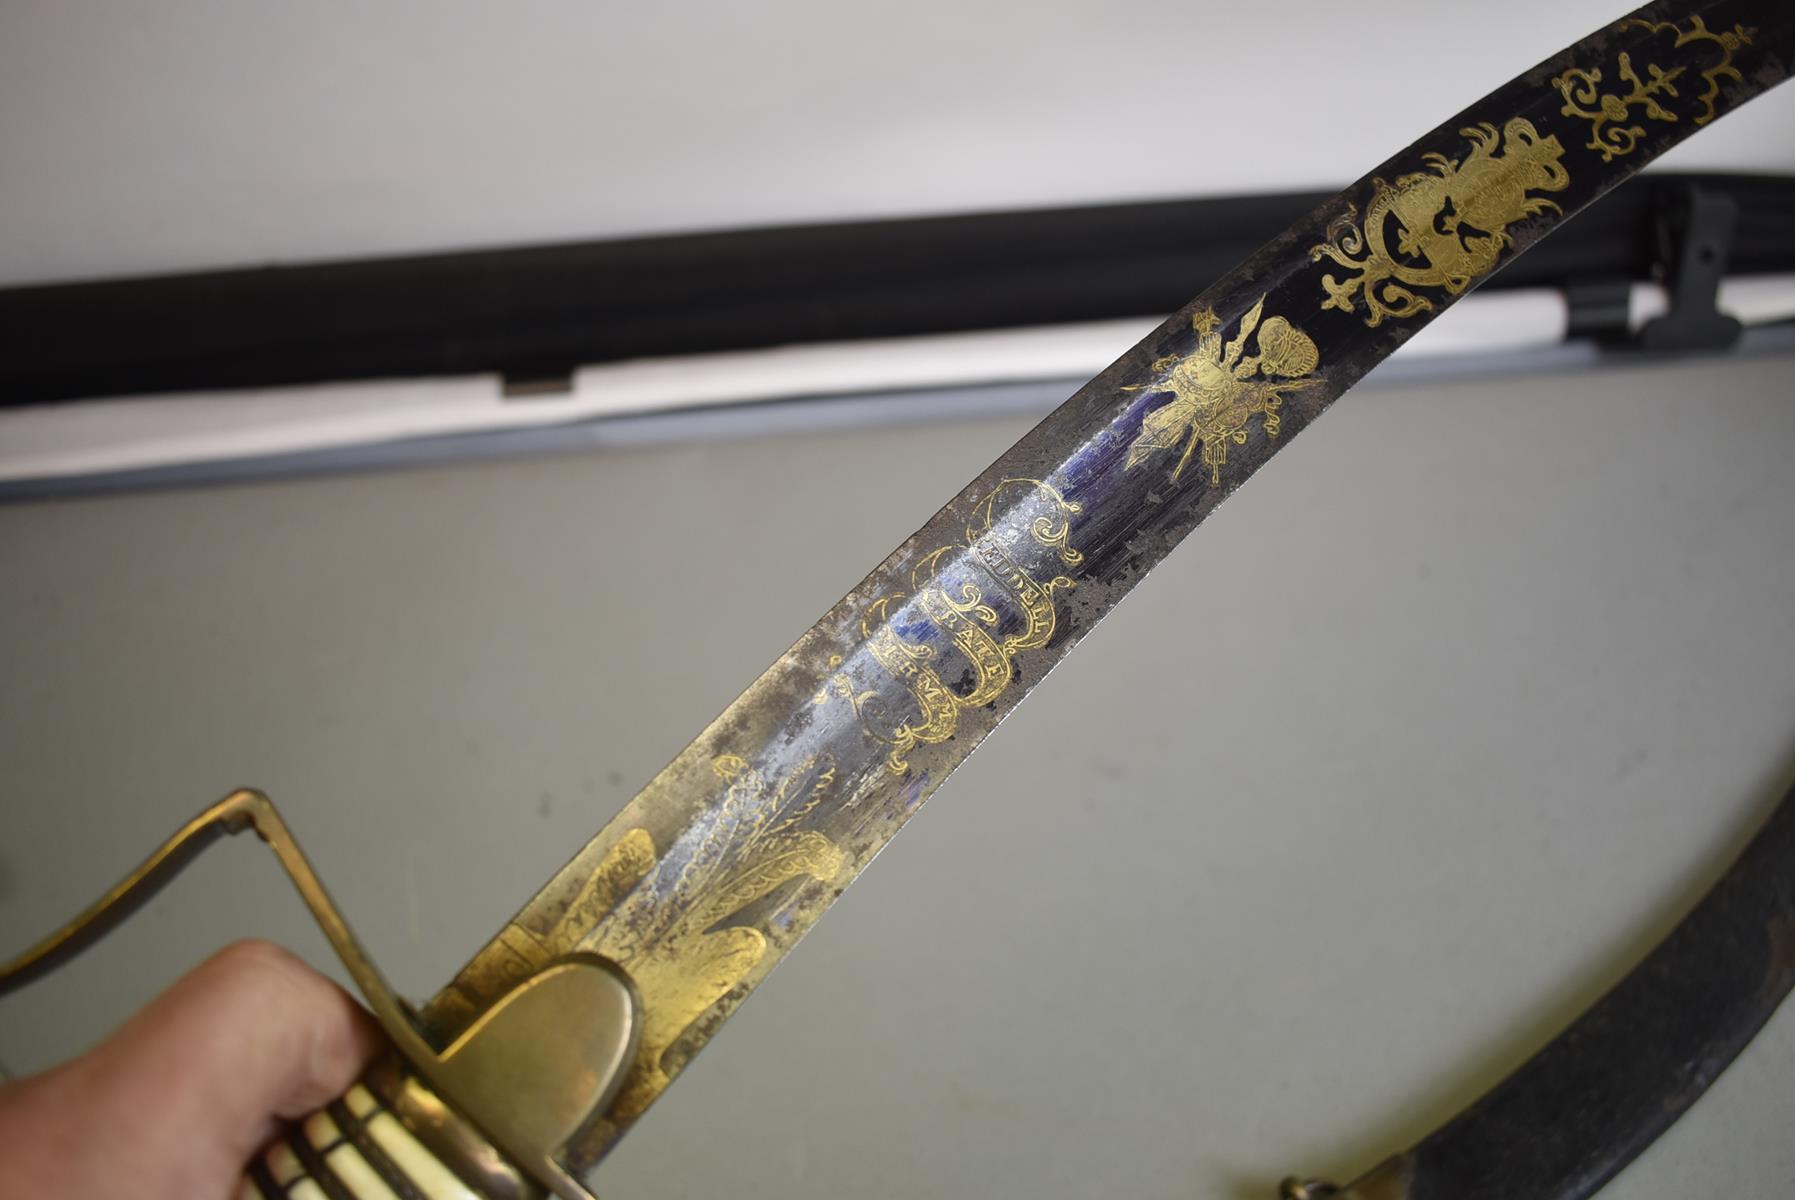 A GEORGIAN OFFICER'S SABRE, 77.5cm curved blade decorated with scrolling foliage, stands of arms, - Image 8 of 15